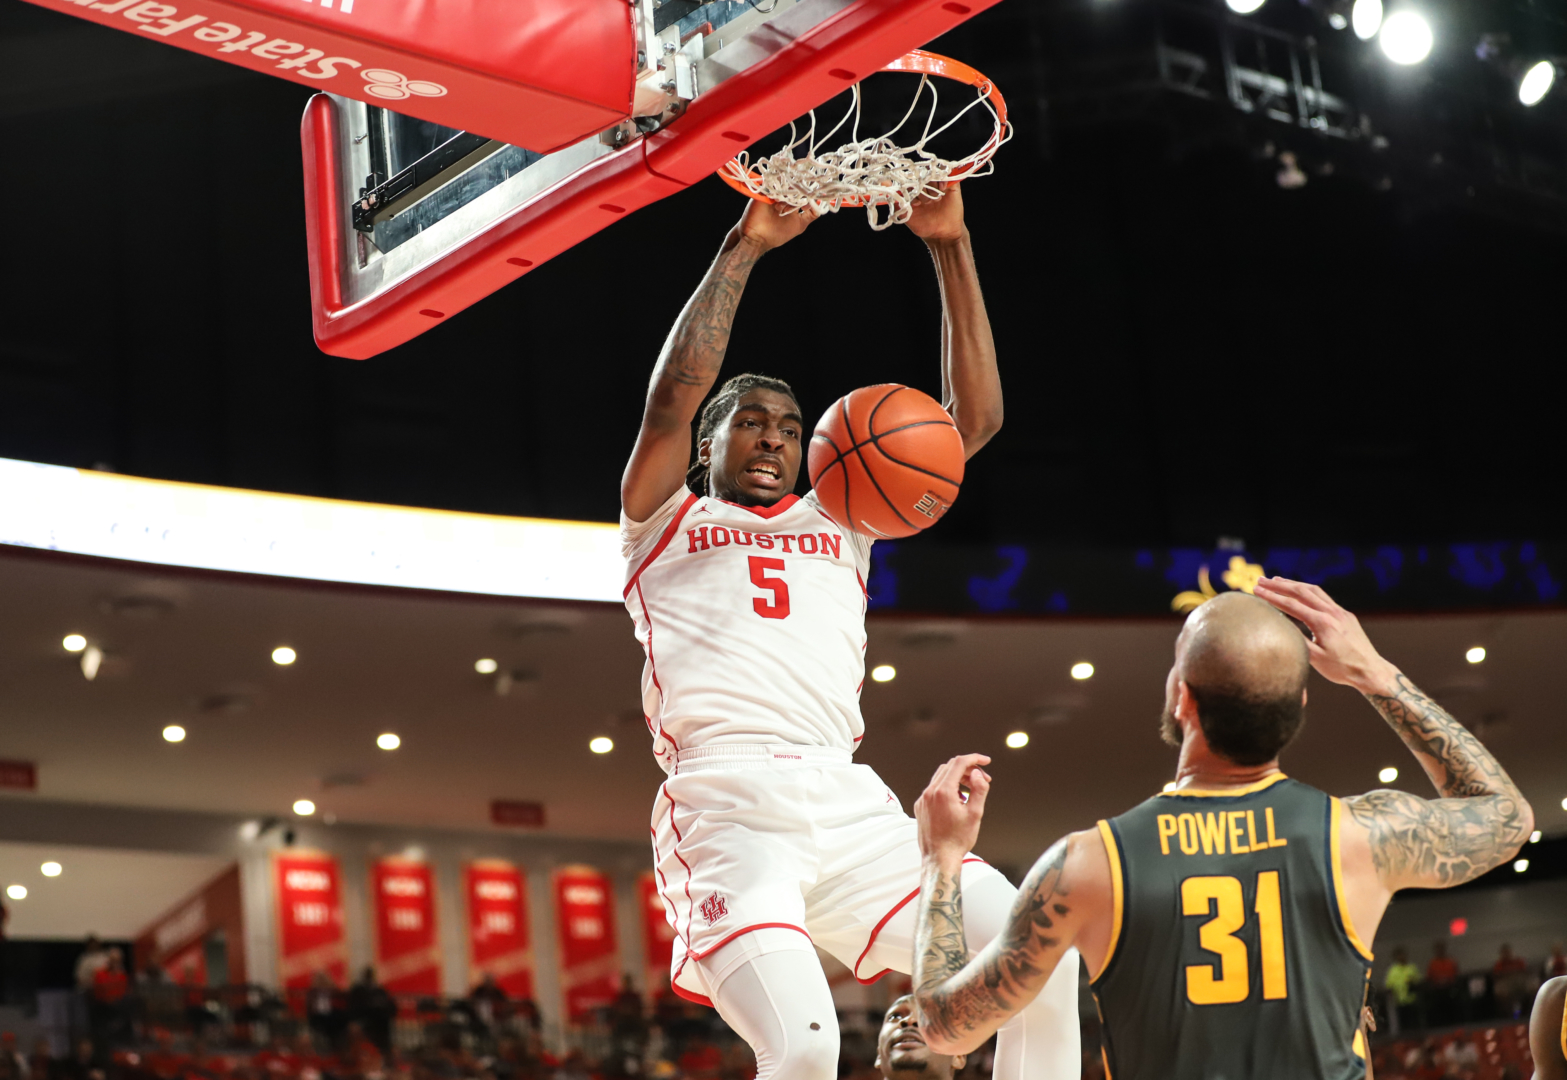 Ja'Vier Francis slams home one of his five first-half dunks in No. 5 UH's win over North Carolina A&T on Tuesday night at Fertitta Center. | Sean Thomas/The Cougar